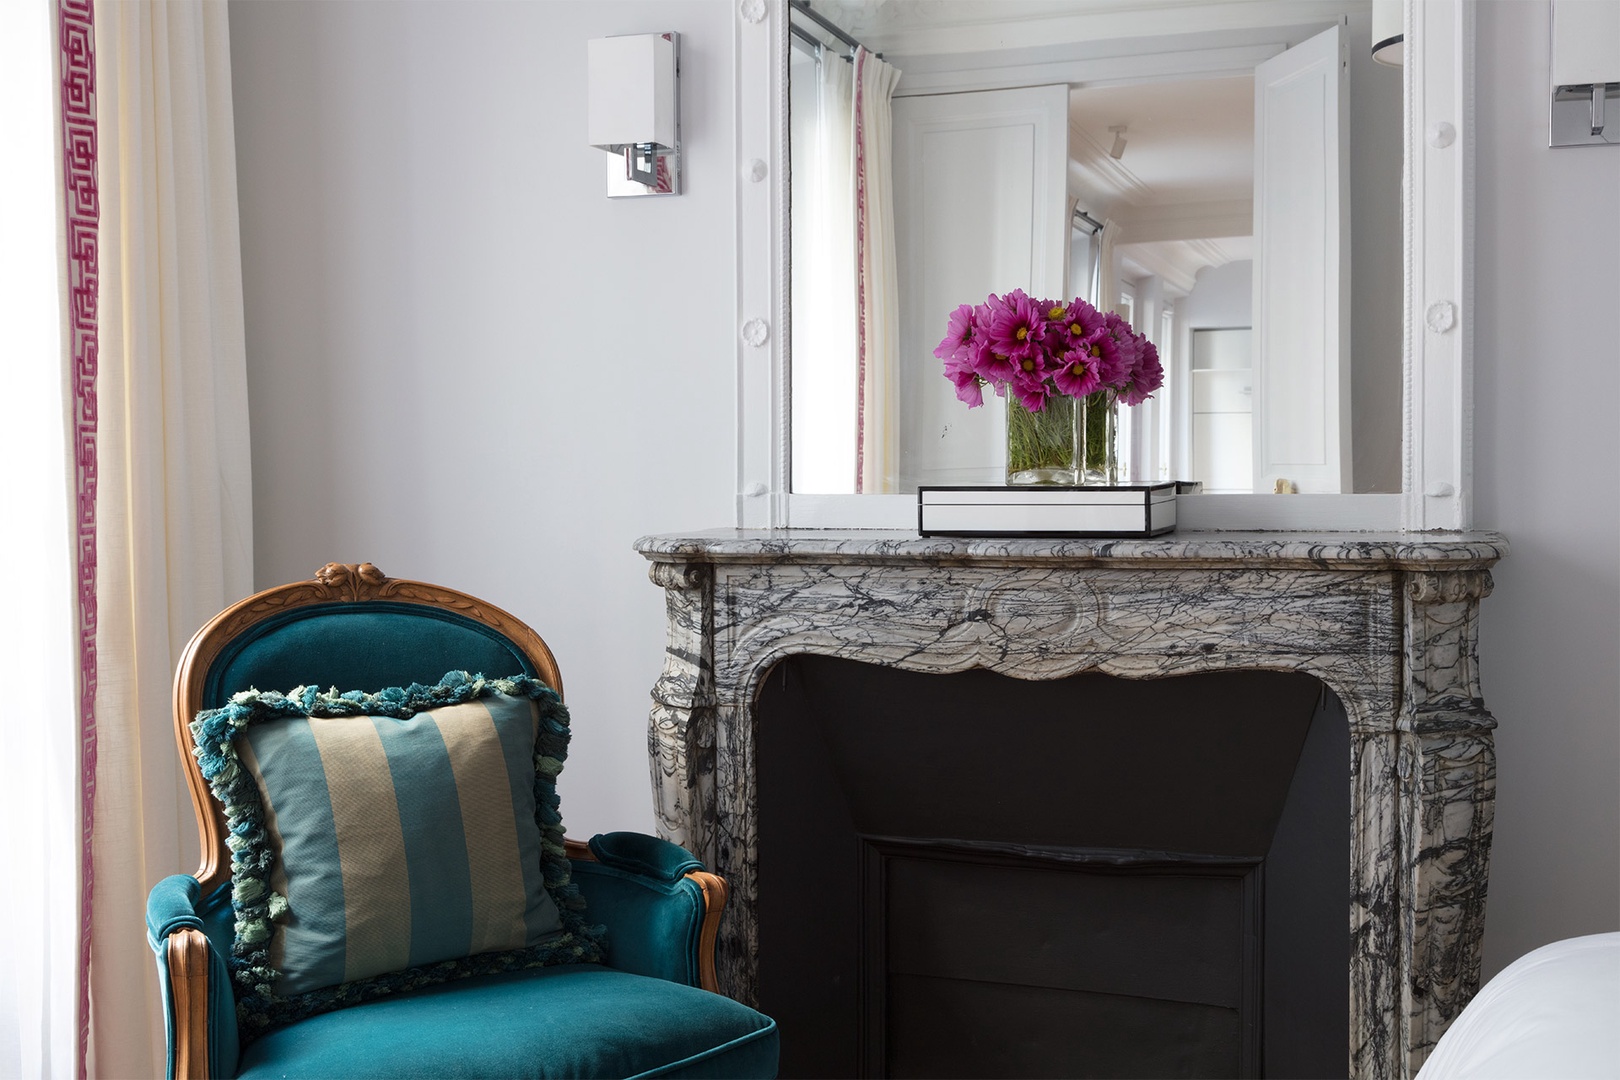 The marble fireplace in bedroom 1 adds lots of charm.